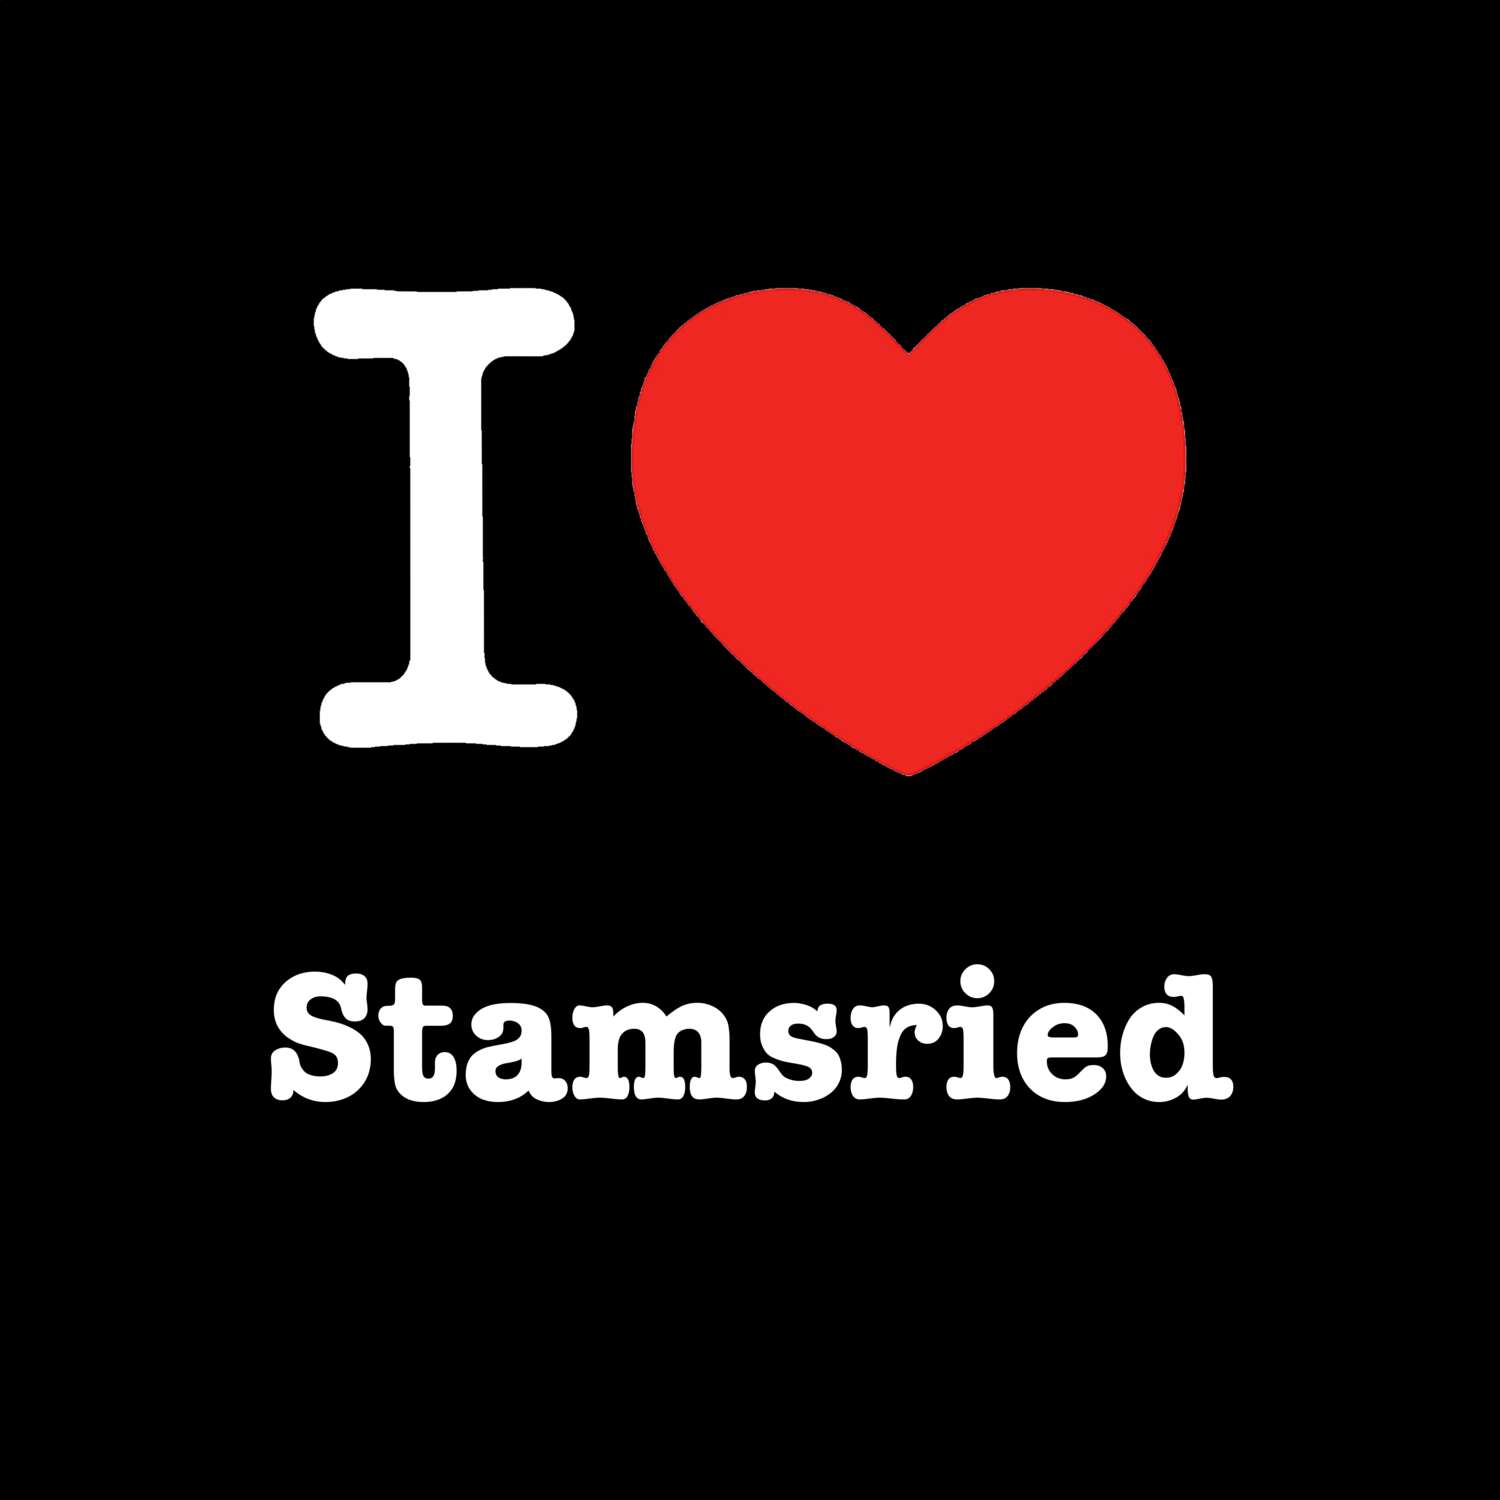 Stamsried T-Shirt »I love«